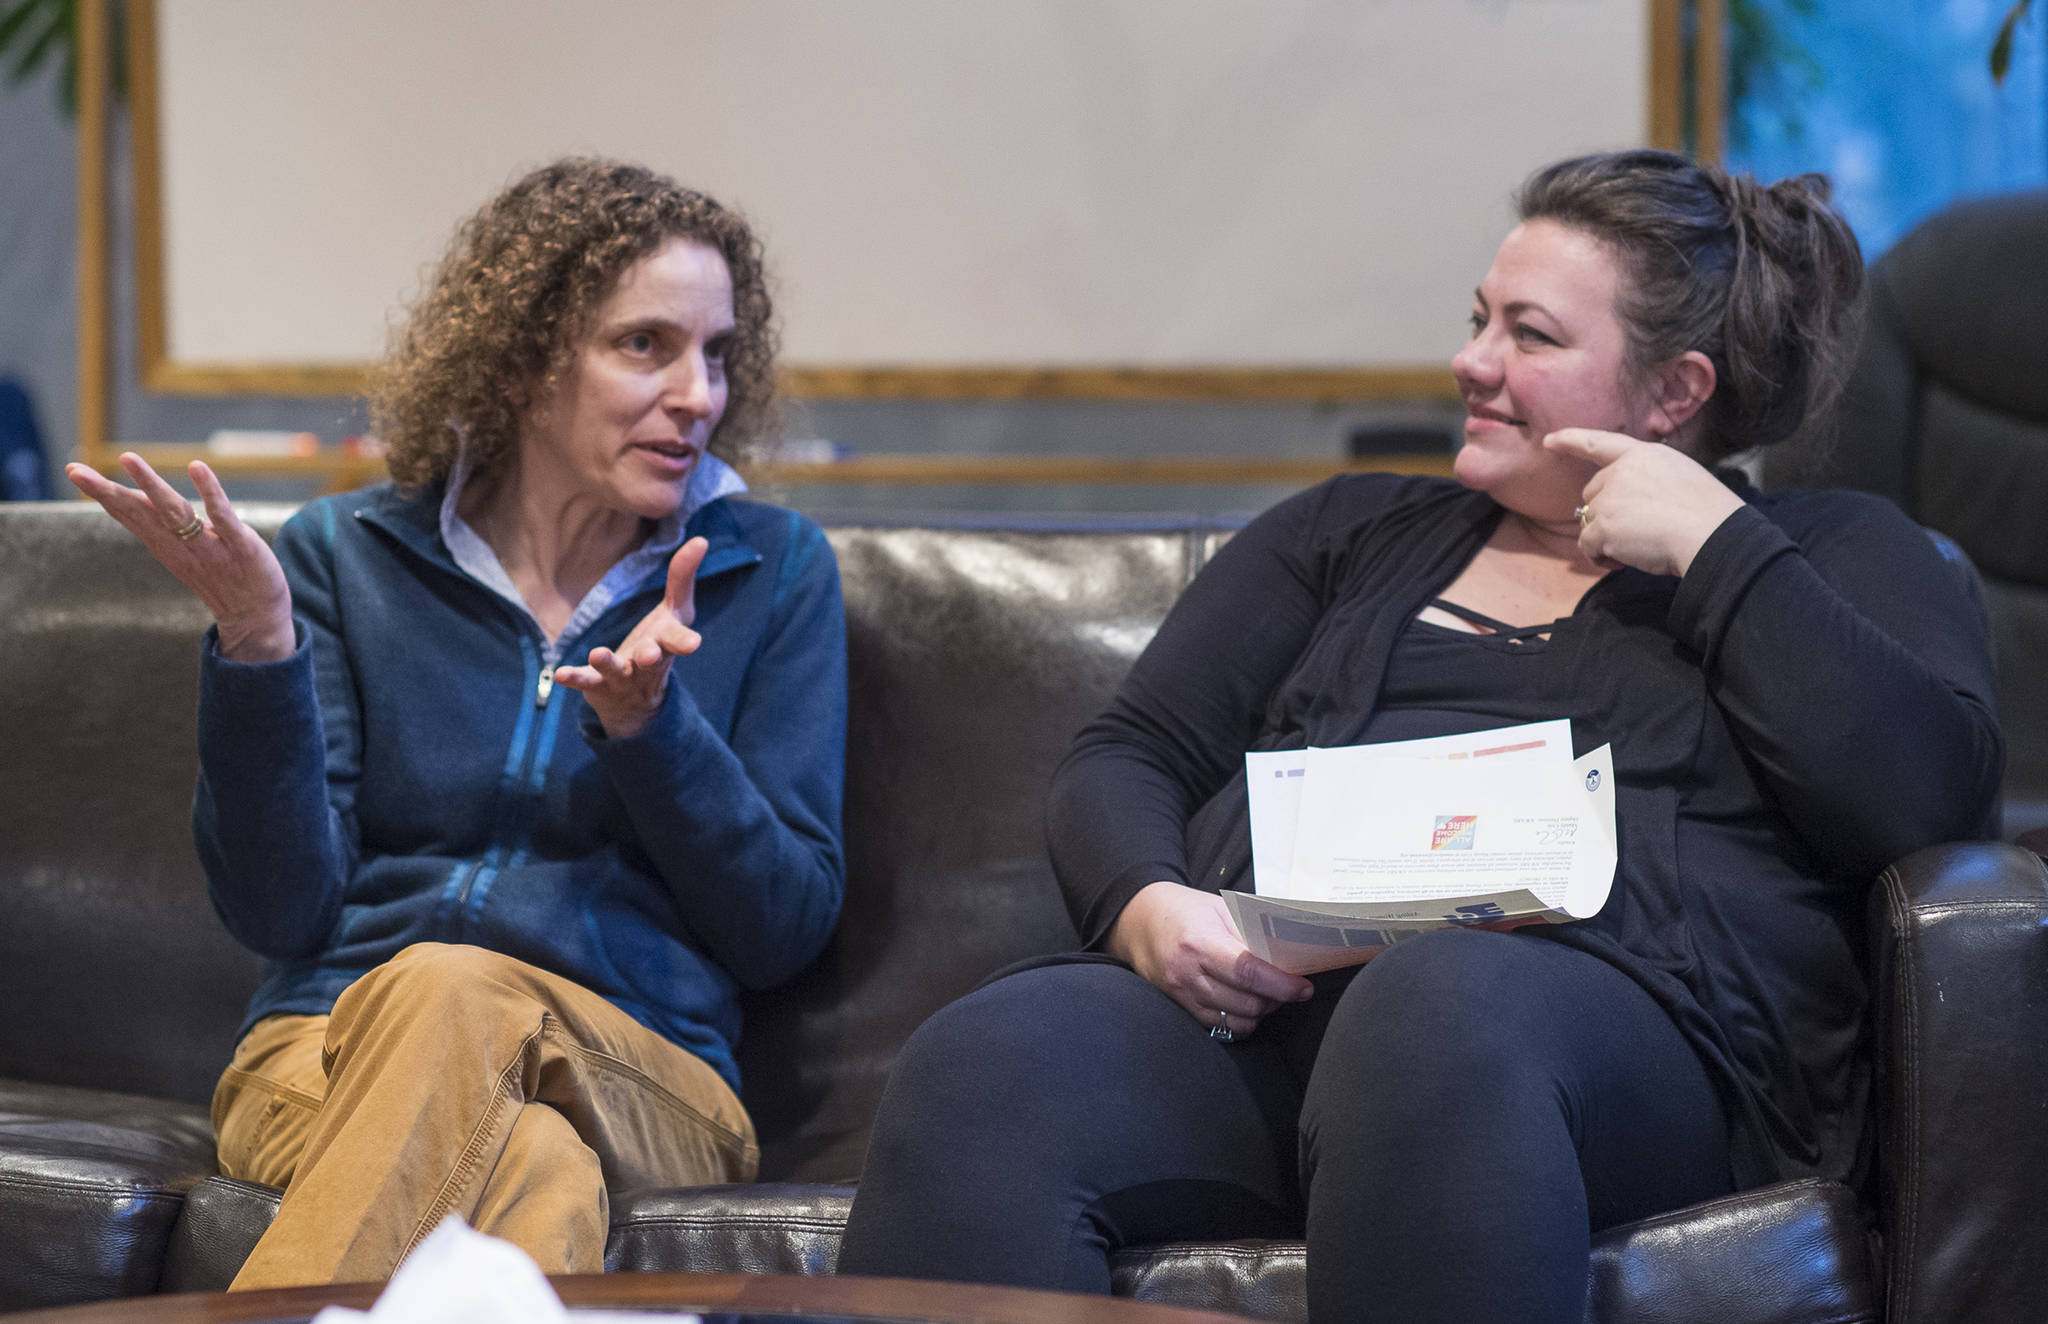 AWARE Executive Director Saralynn Tabachnick, left, and Deputy Director Mandy O’Neal Cole talk about the shelter becoming gender inclusive during an interview on Monday, Dec. 11, 2017. (Michael Penn | Juneau Empire File)